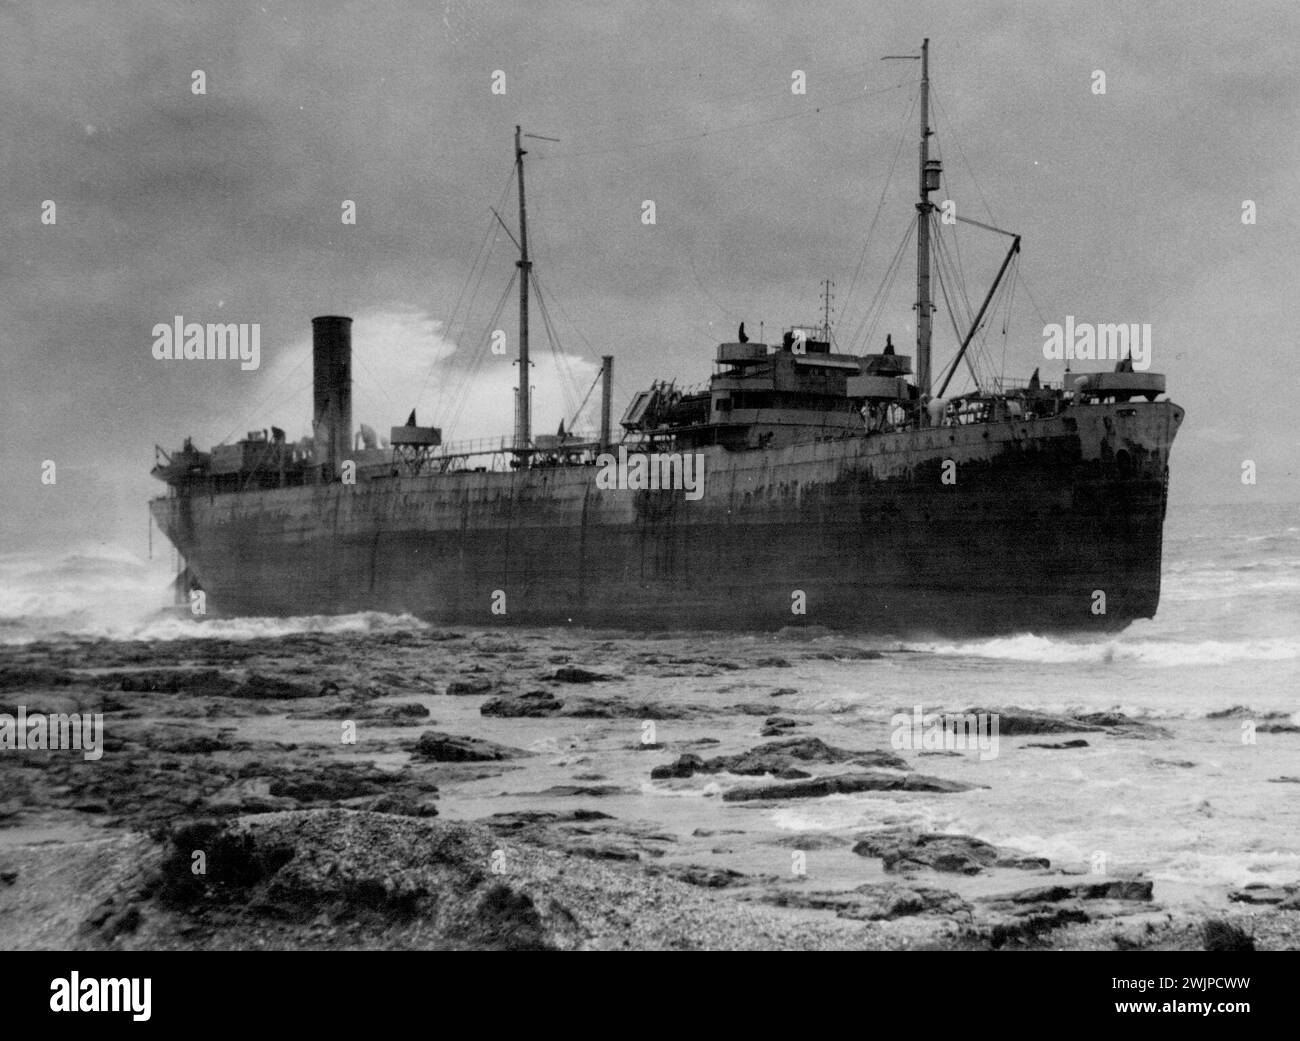 Five sailors still remained aboard this allied steamer, wrecked in a gale on the Australian coast, when this photo was taken. Eventually all hands were saved but on the first day of rescue efforts, four Australian soldiers lost their lives. November 15, 1943. Stock Photo